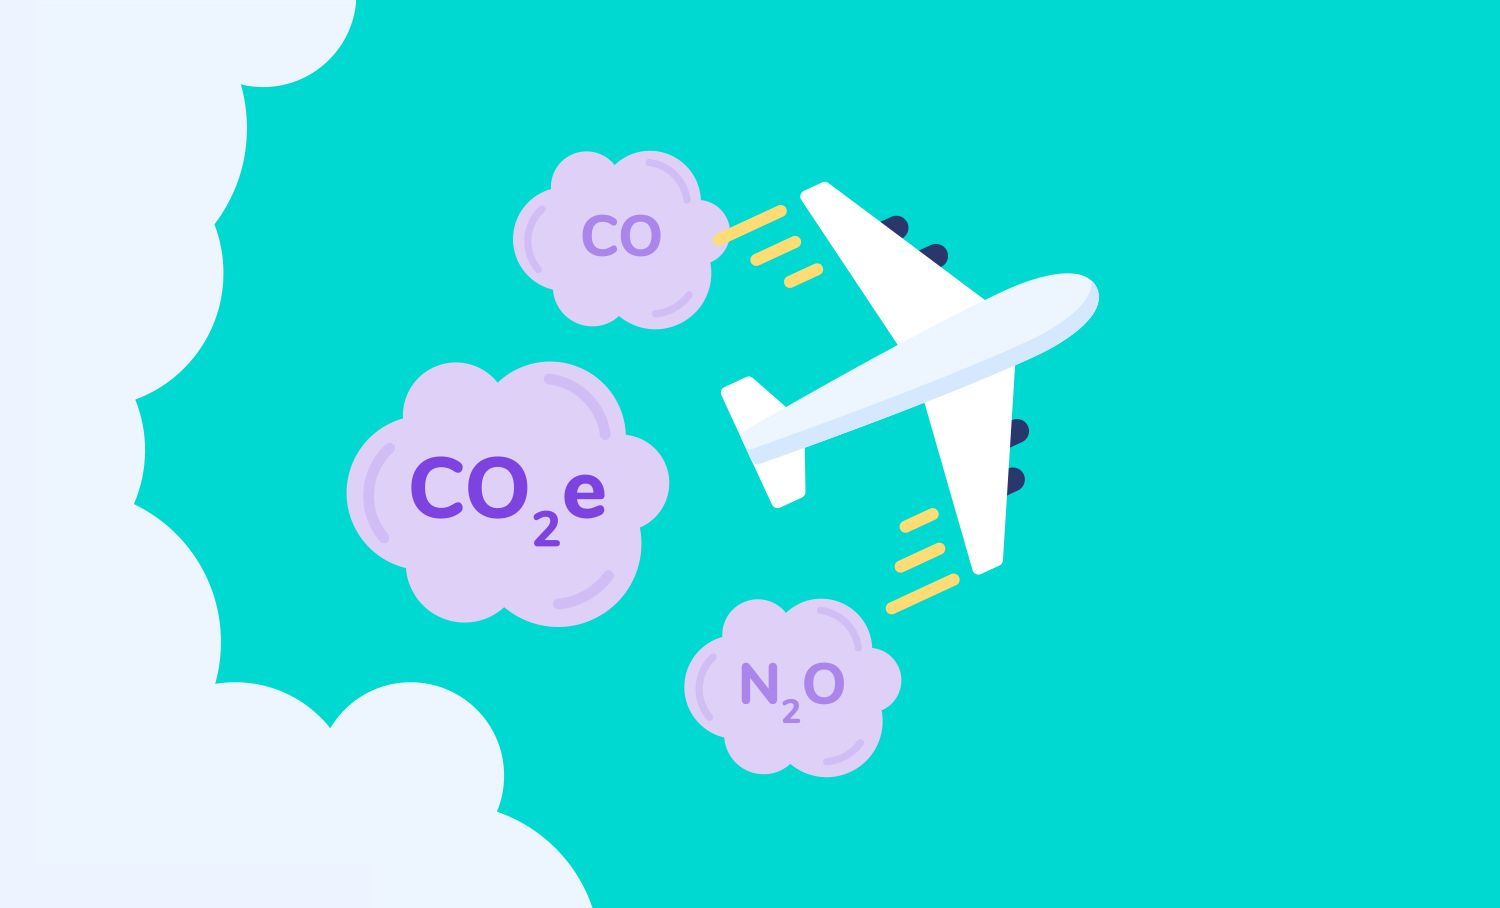 Illustration of an airplane trailing carbon dioxide and nitrous oxide emissions